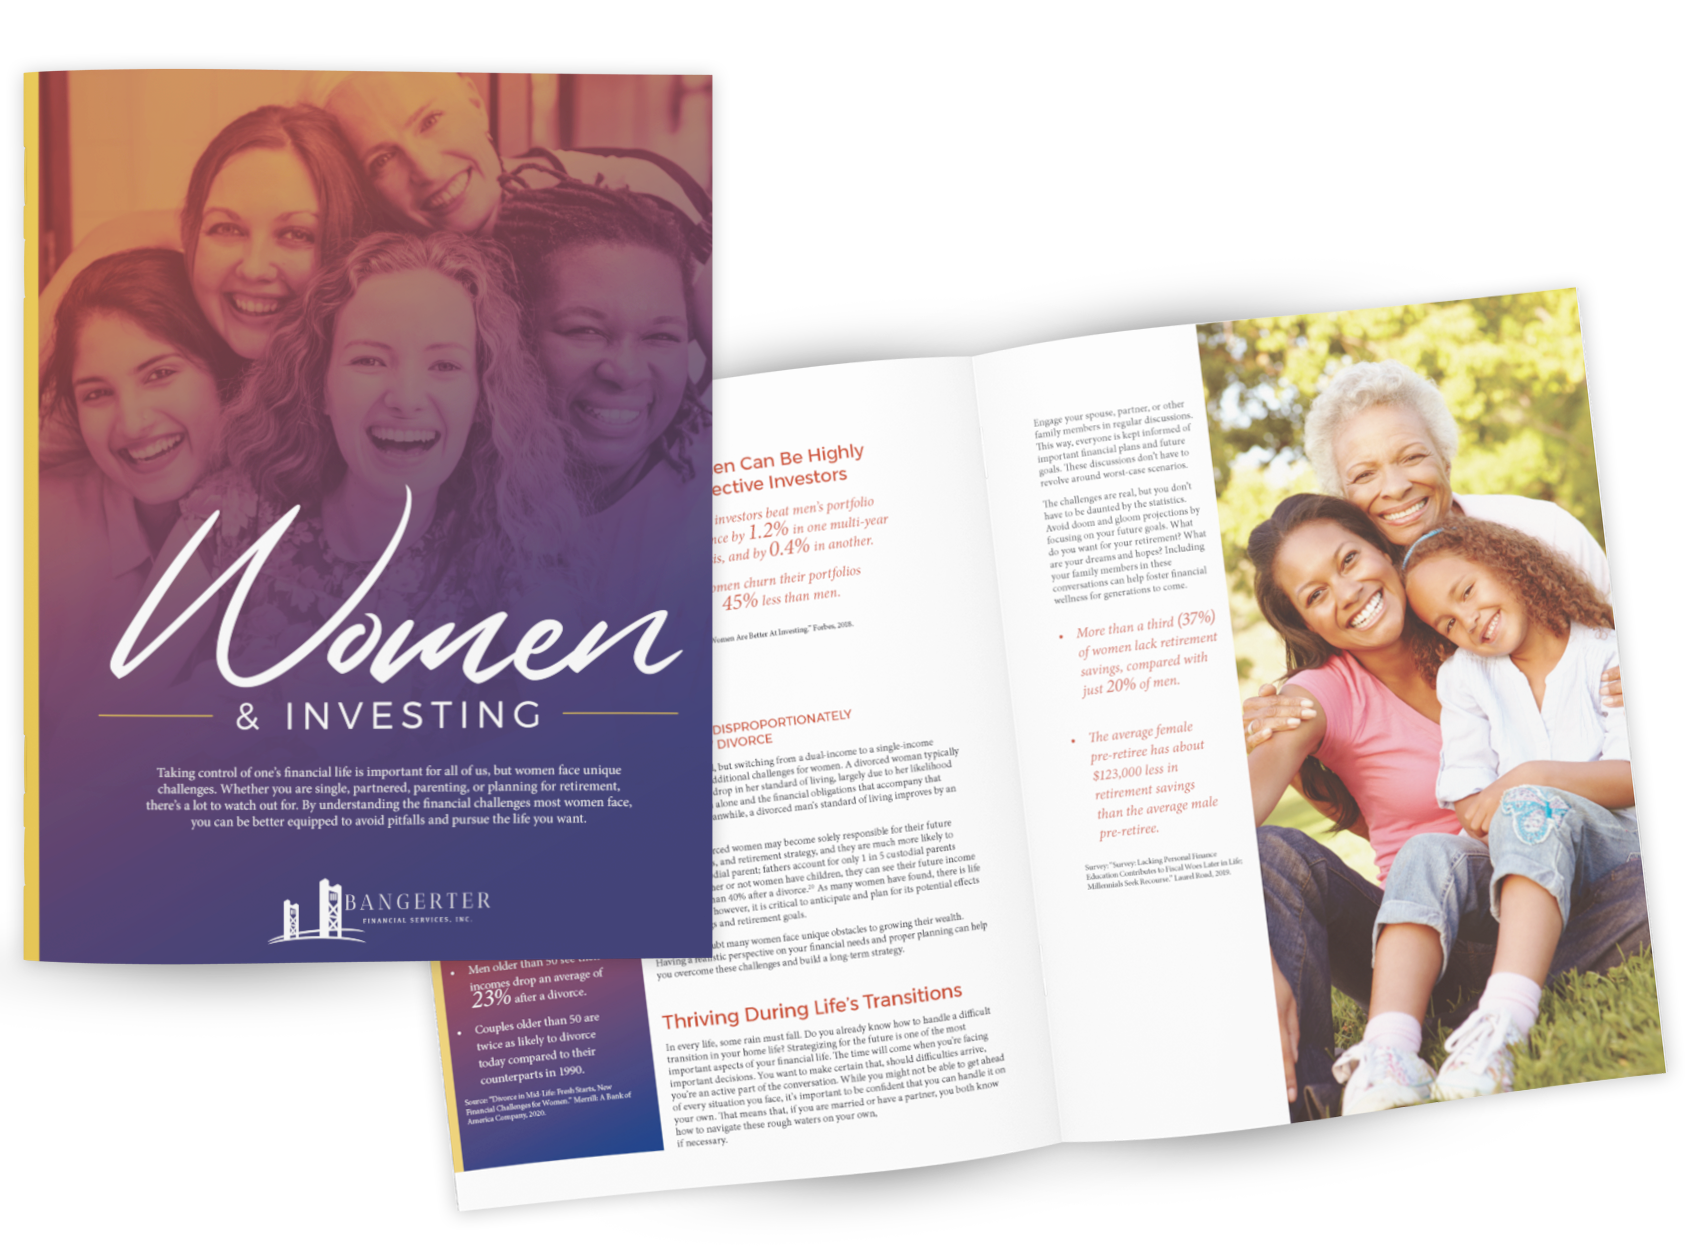 Women and Investing Downloadable Guide